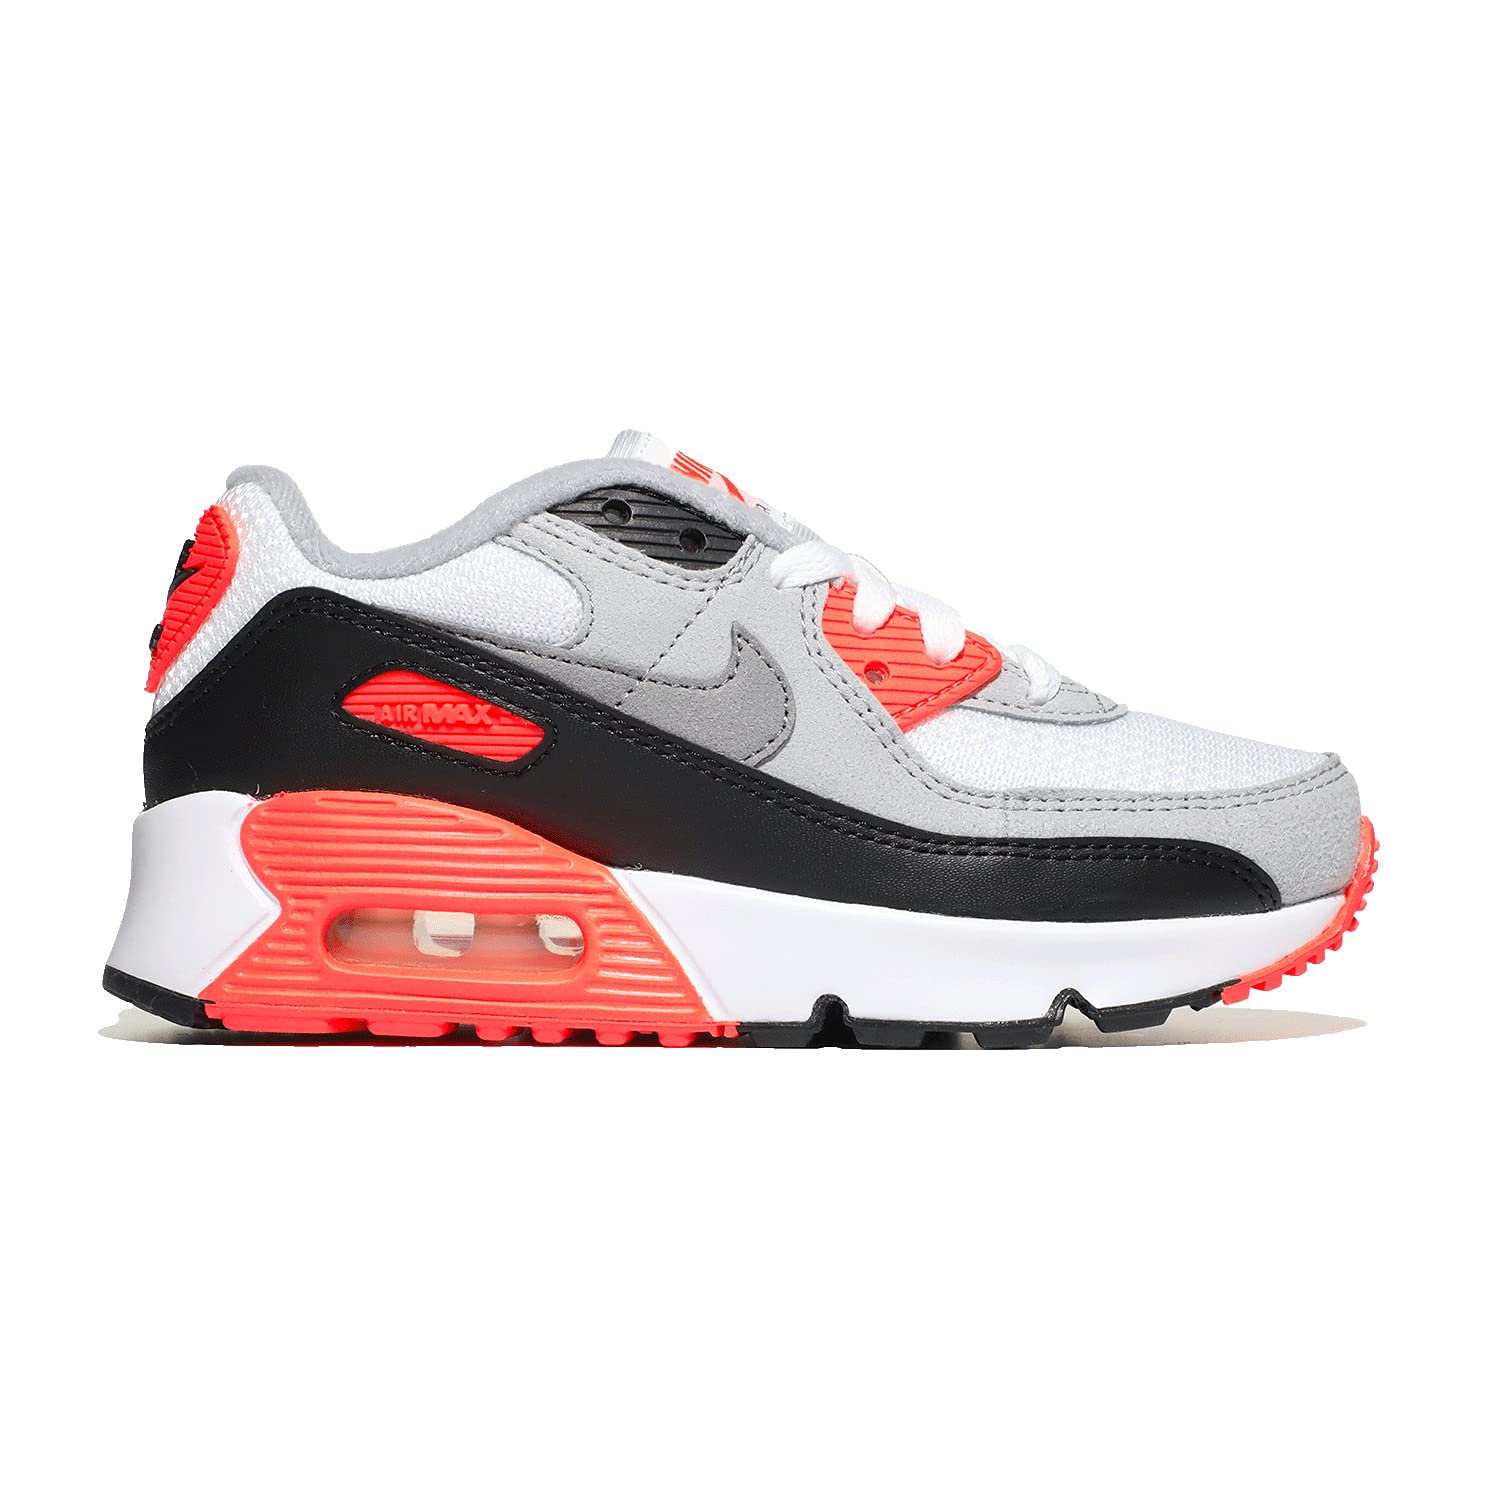 Image 5 of Air Max 90 (Little Kid)